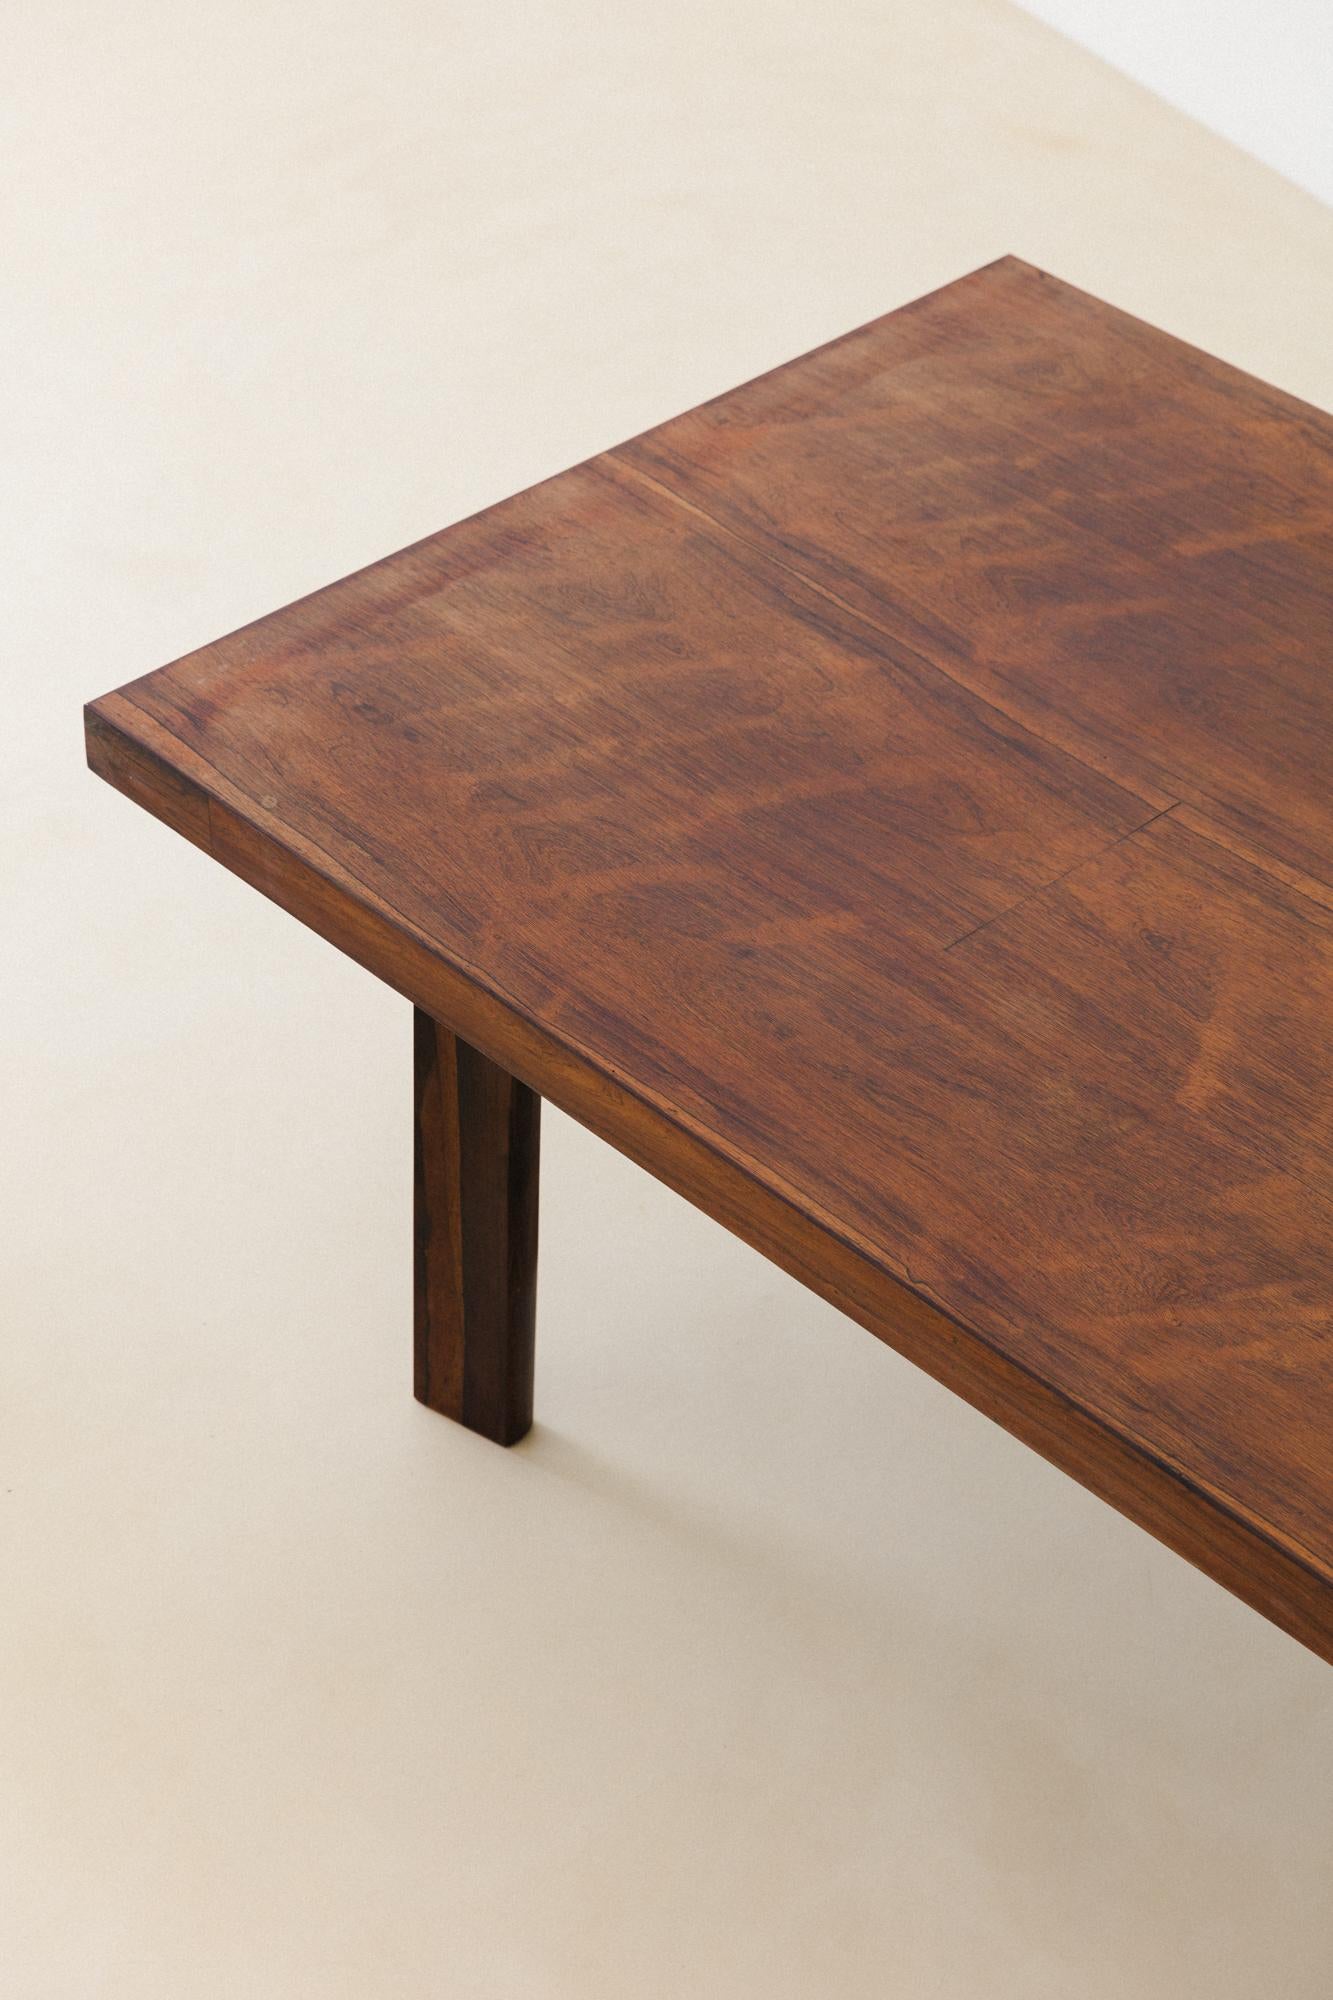 Brazilian Midcentury Dining Table in Rosewood, Unknown Designer, 1960s For Sale 3